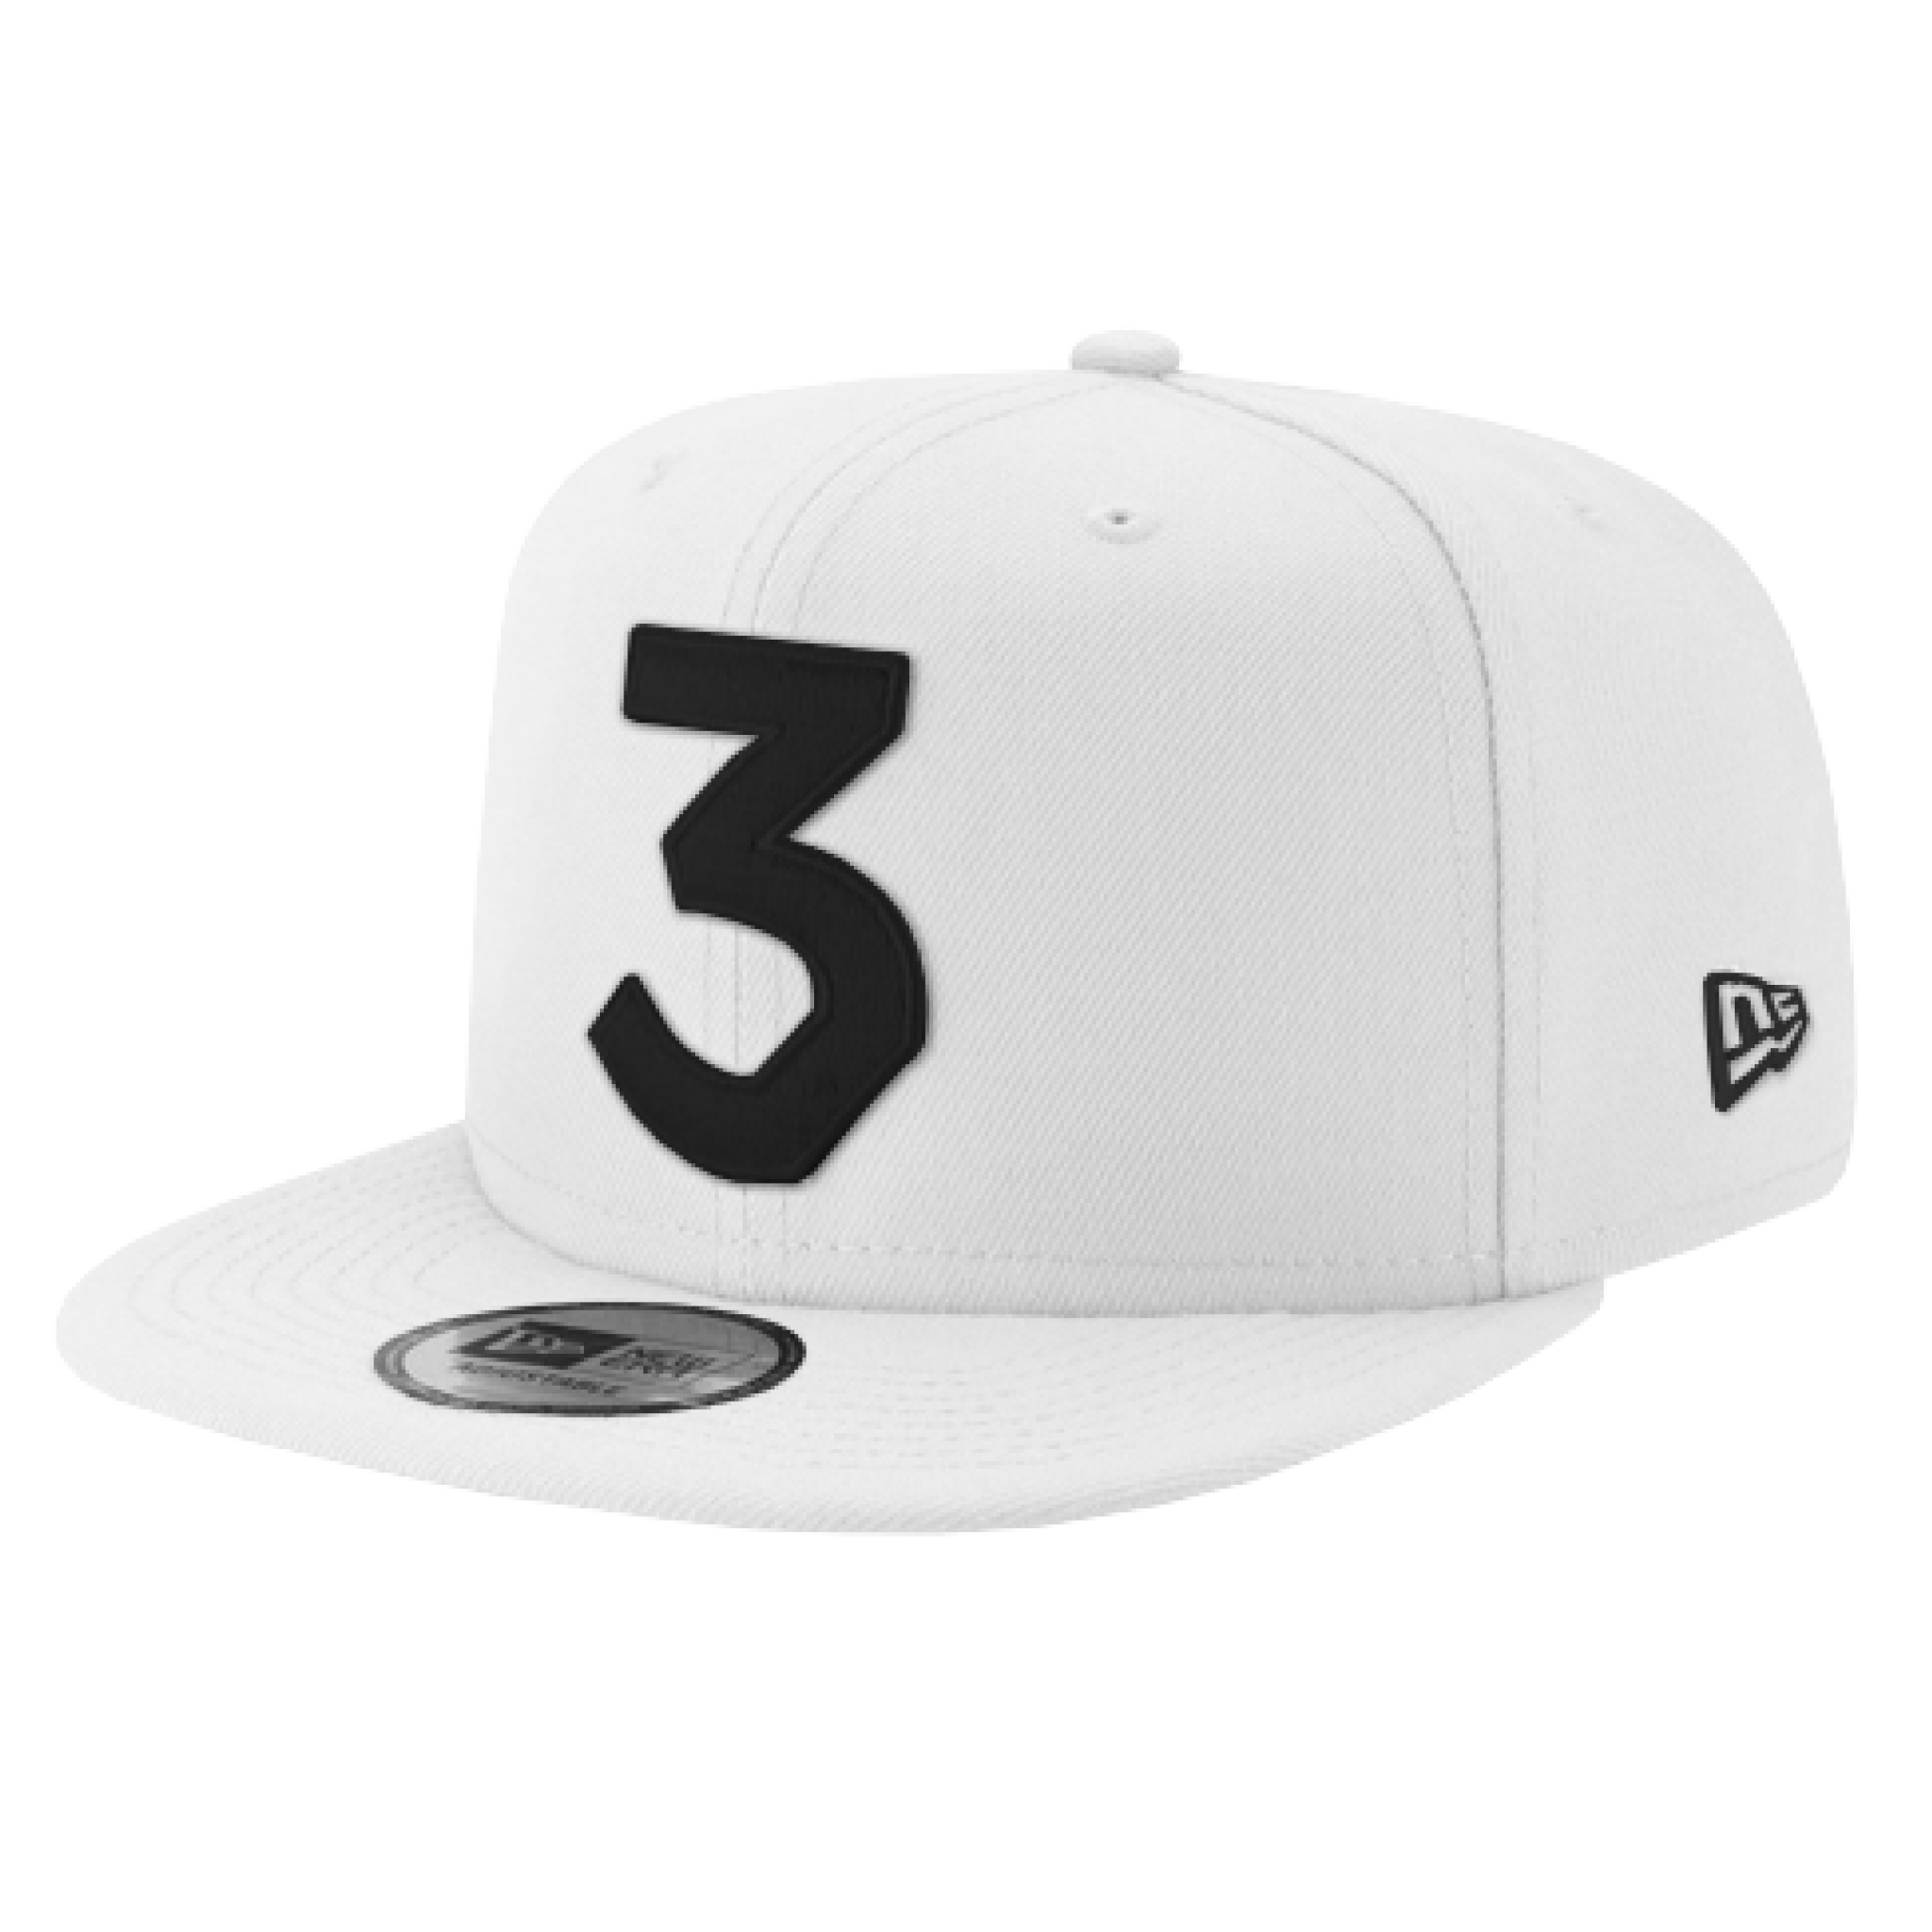 Chance 3 New Era Optic White/Black Hat – Chance the Rapper Official